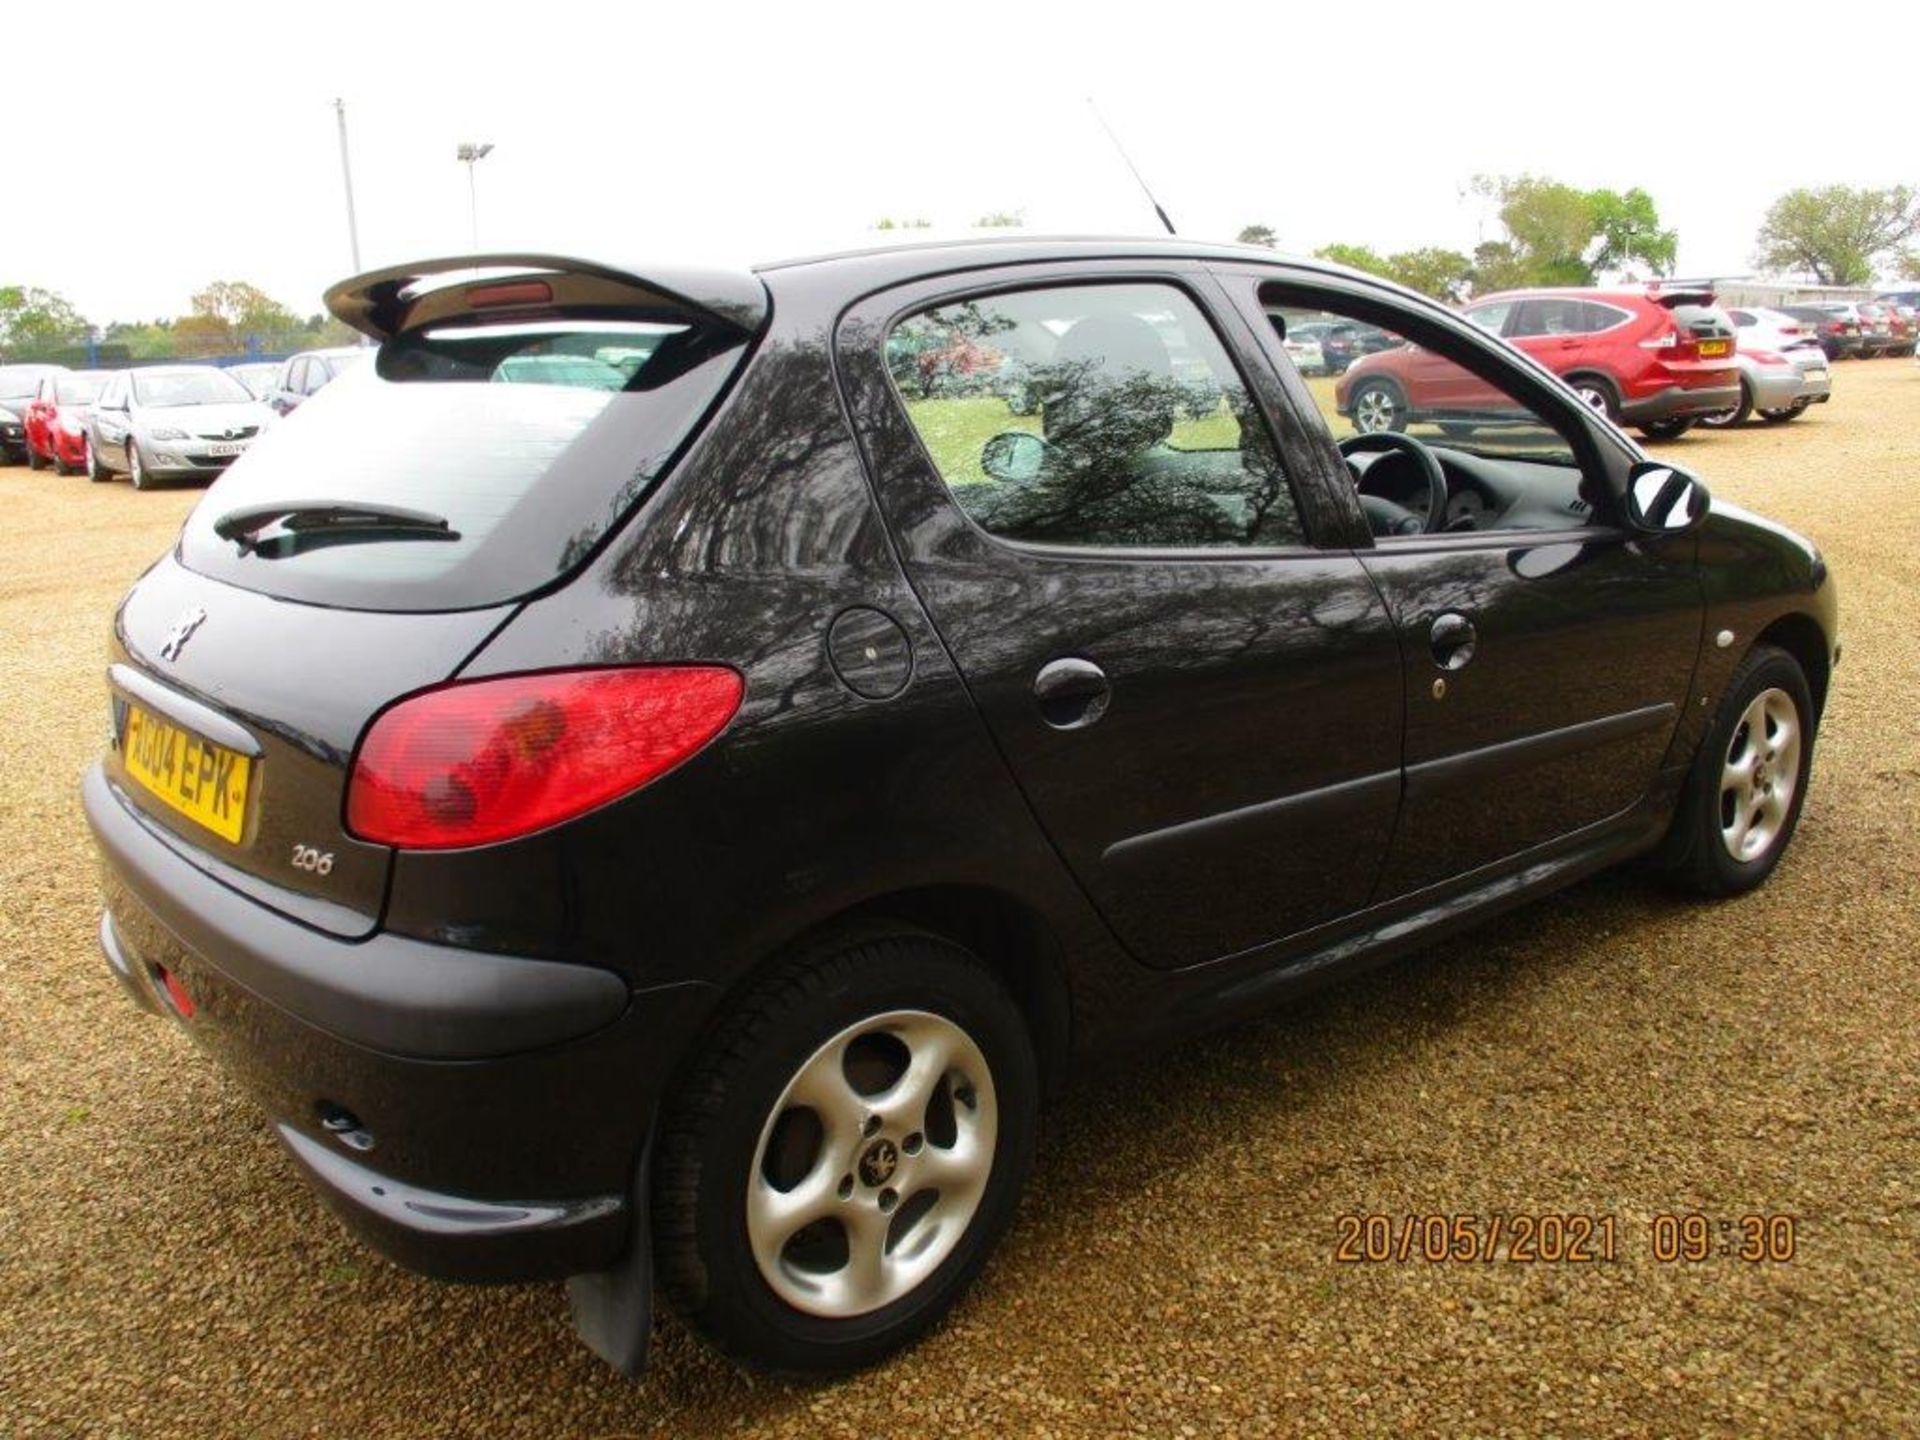 04 04 Peugeot 206 S - Image 4 of 20